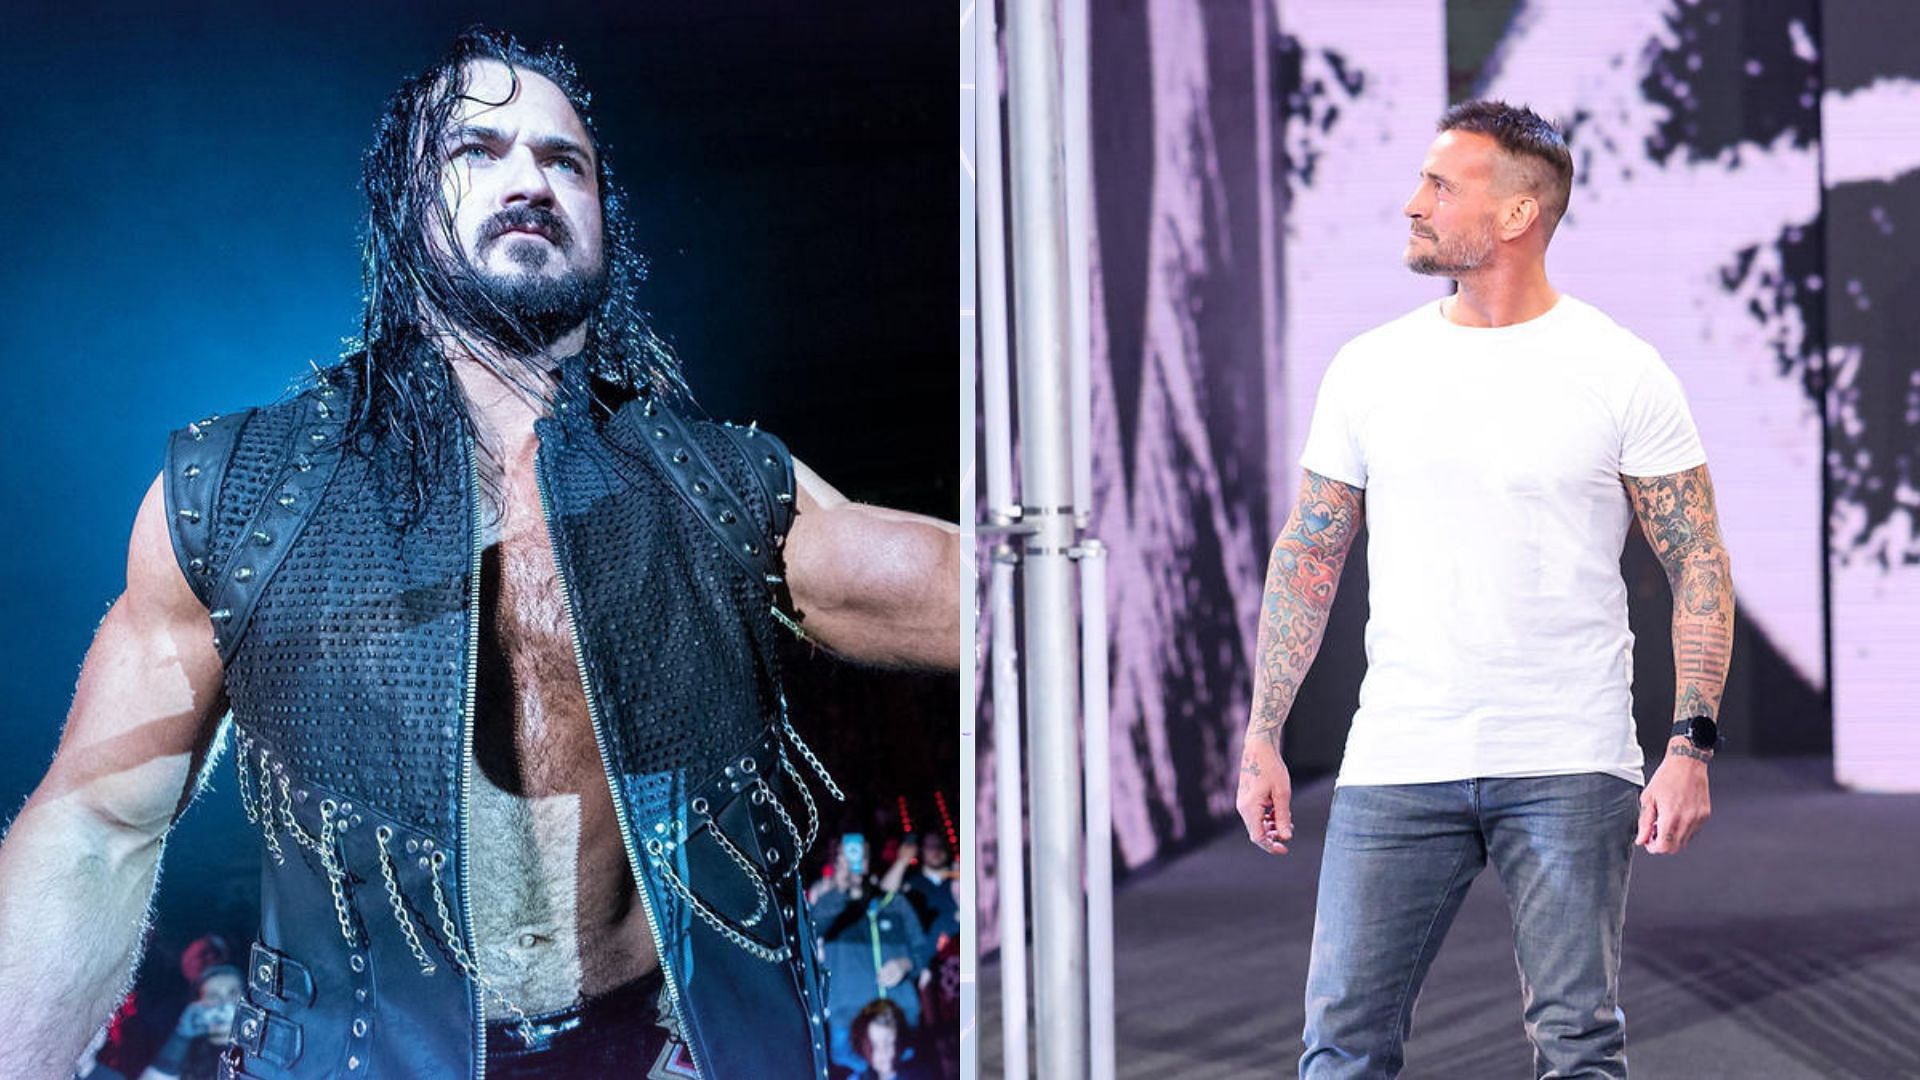 Drew McIntyre and CM Punk could clash in WWE